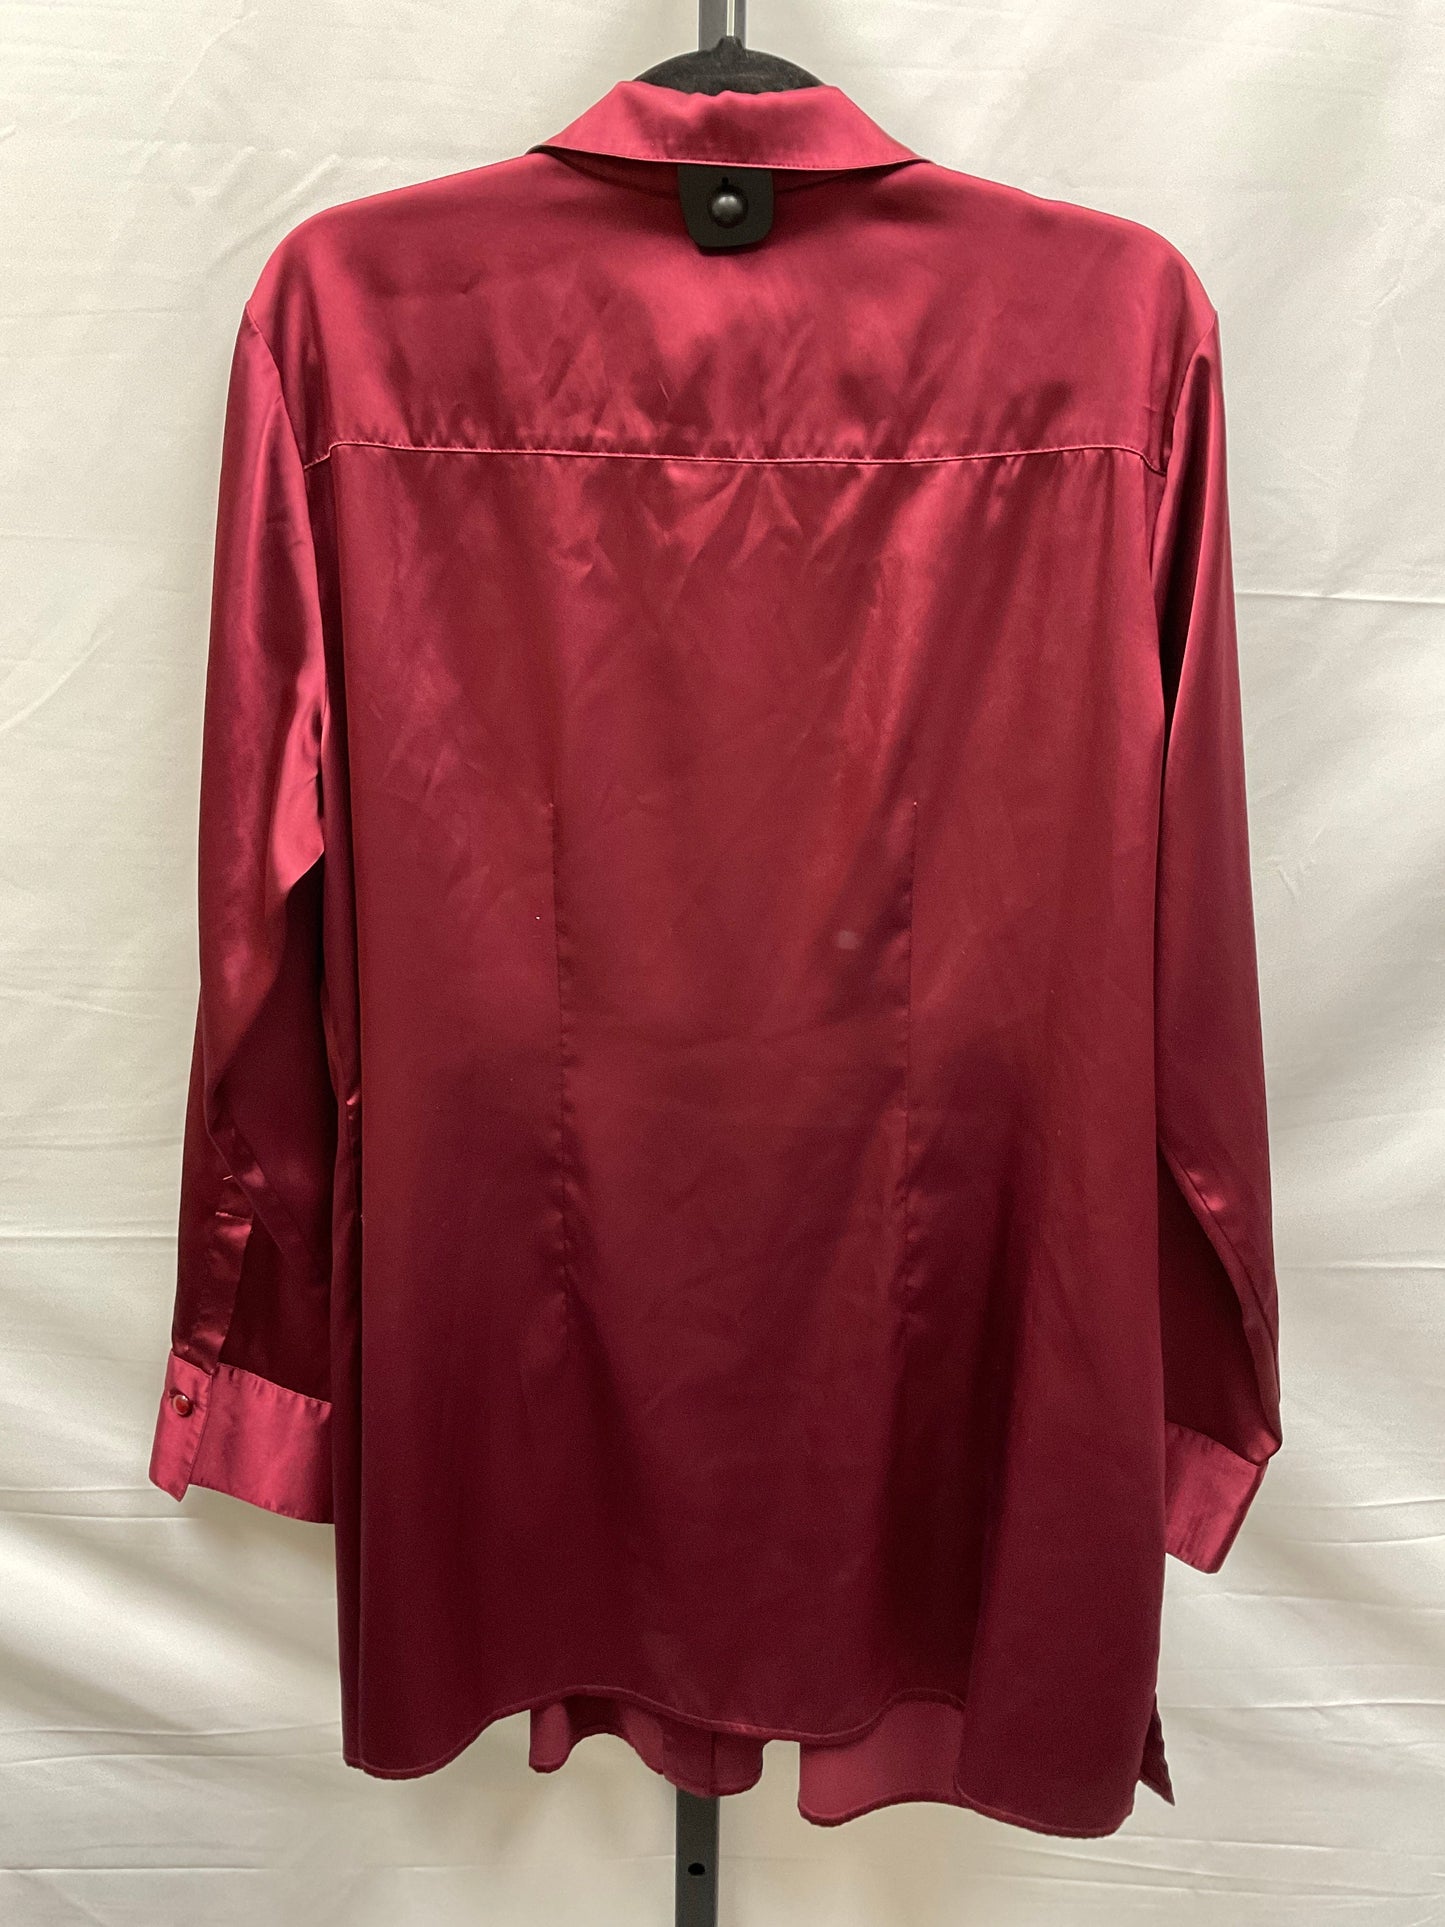 Red Top Long Sleeve Chicos, Size Xl